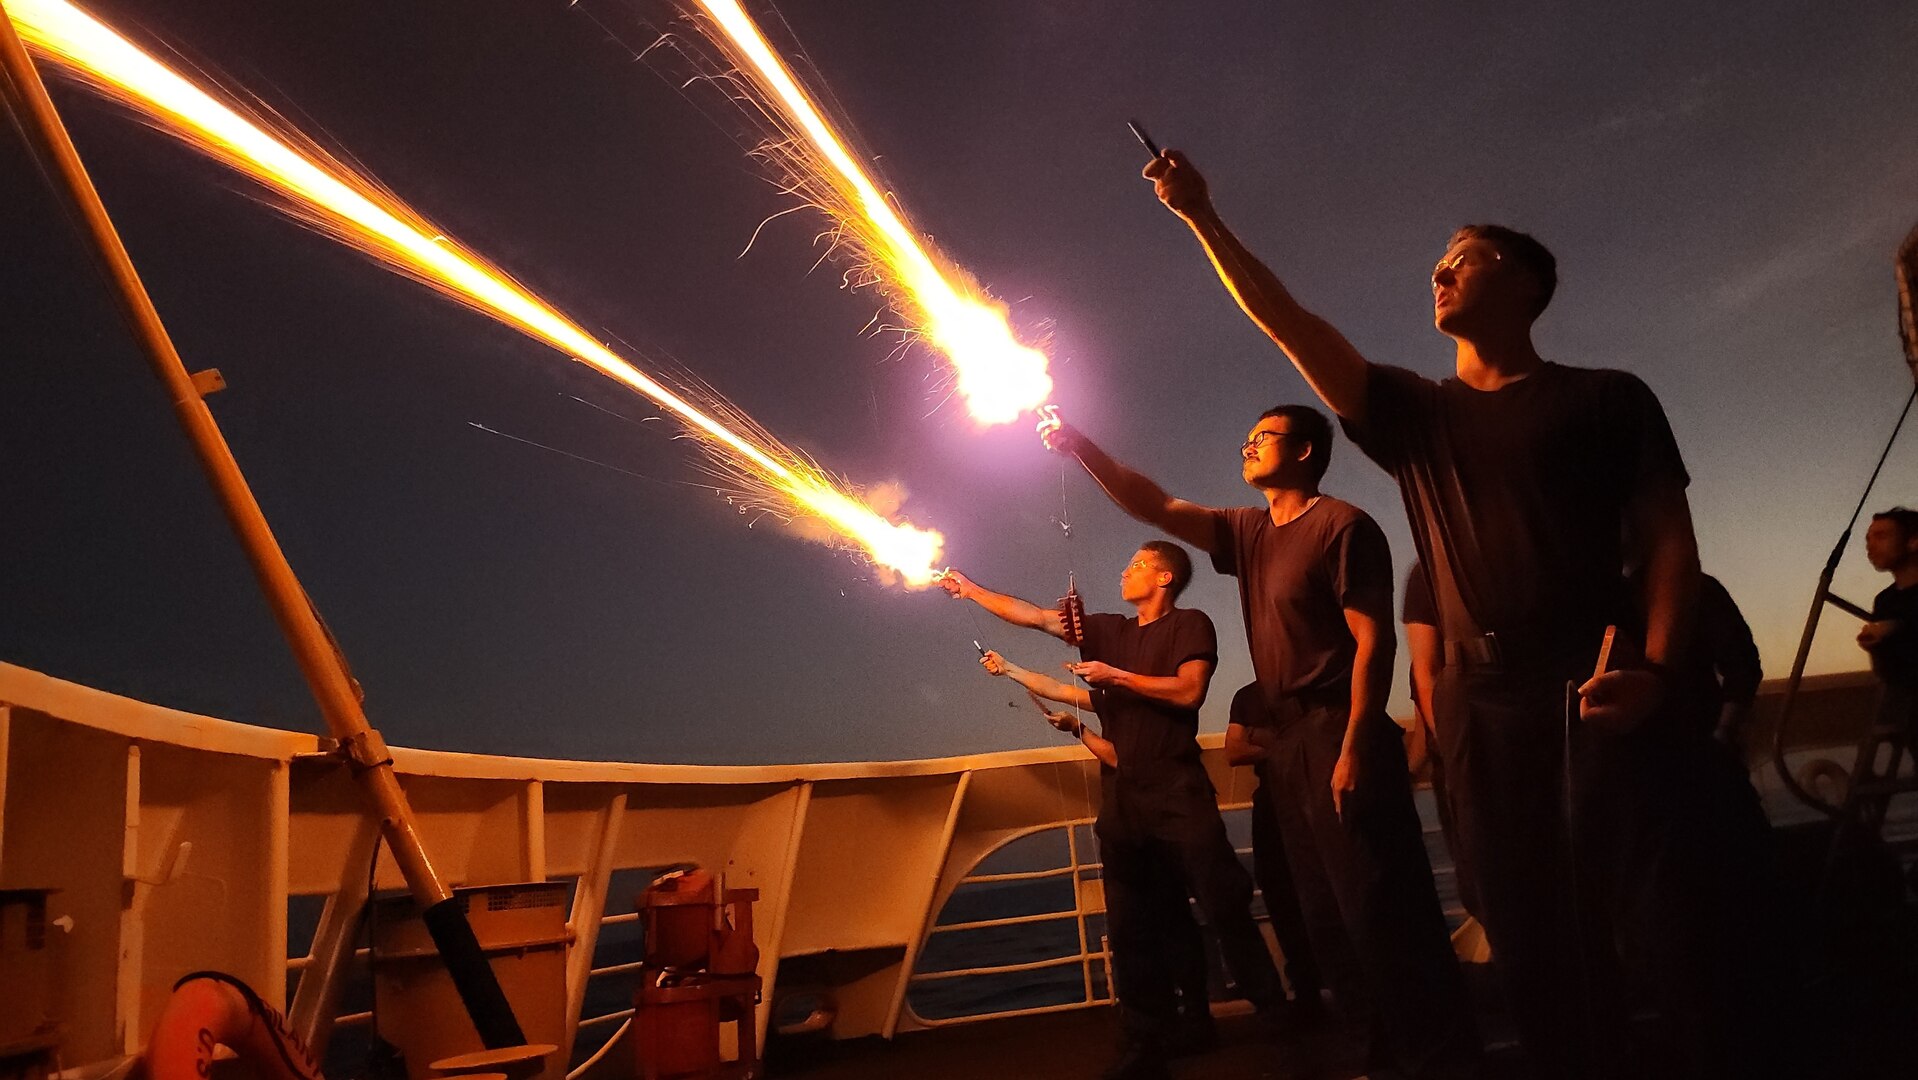 USCGC Vigilant’s (WMEC 617) crew operates pyrotechnics during a training exercise in the Florida Straits Feb. 10, 2023. Vigilant is on a patrol in support of Operation Vigilant Sentry in the Caribbean Sea. (U.S. Coast Guard photo by Petty Officer 3rd Class Christian Rasco)